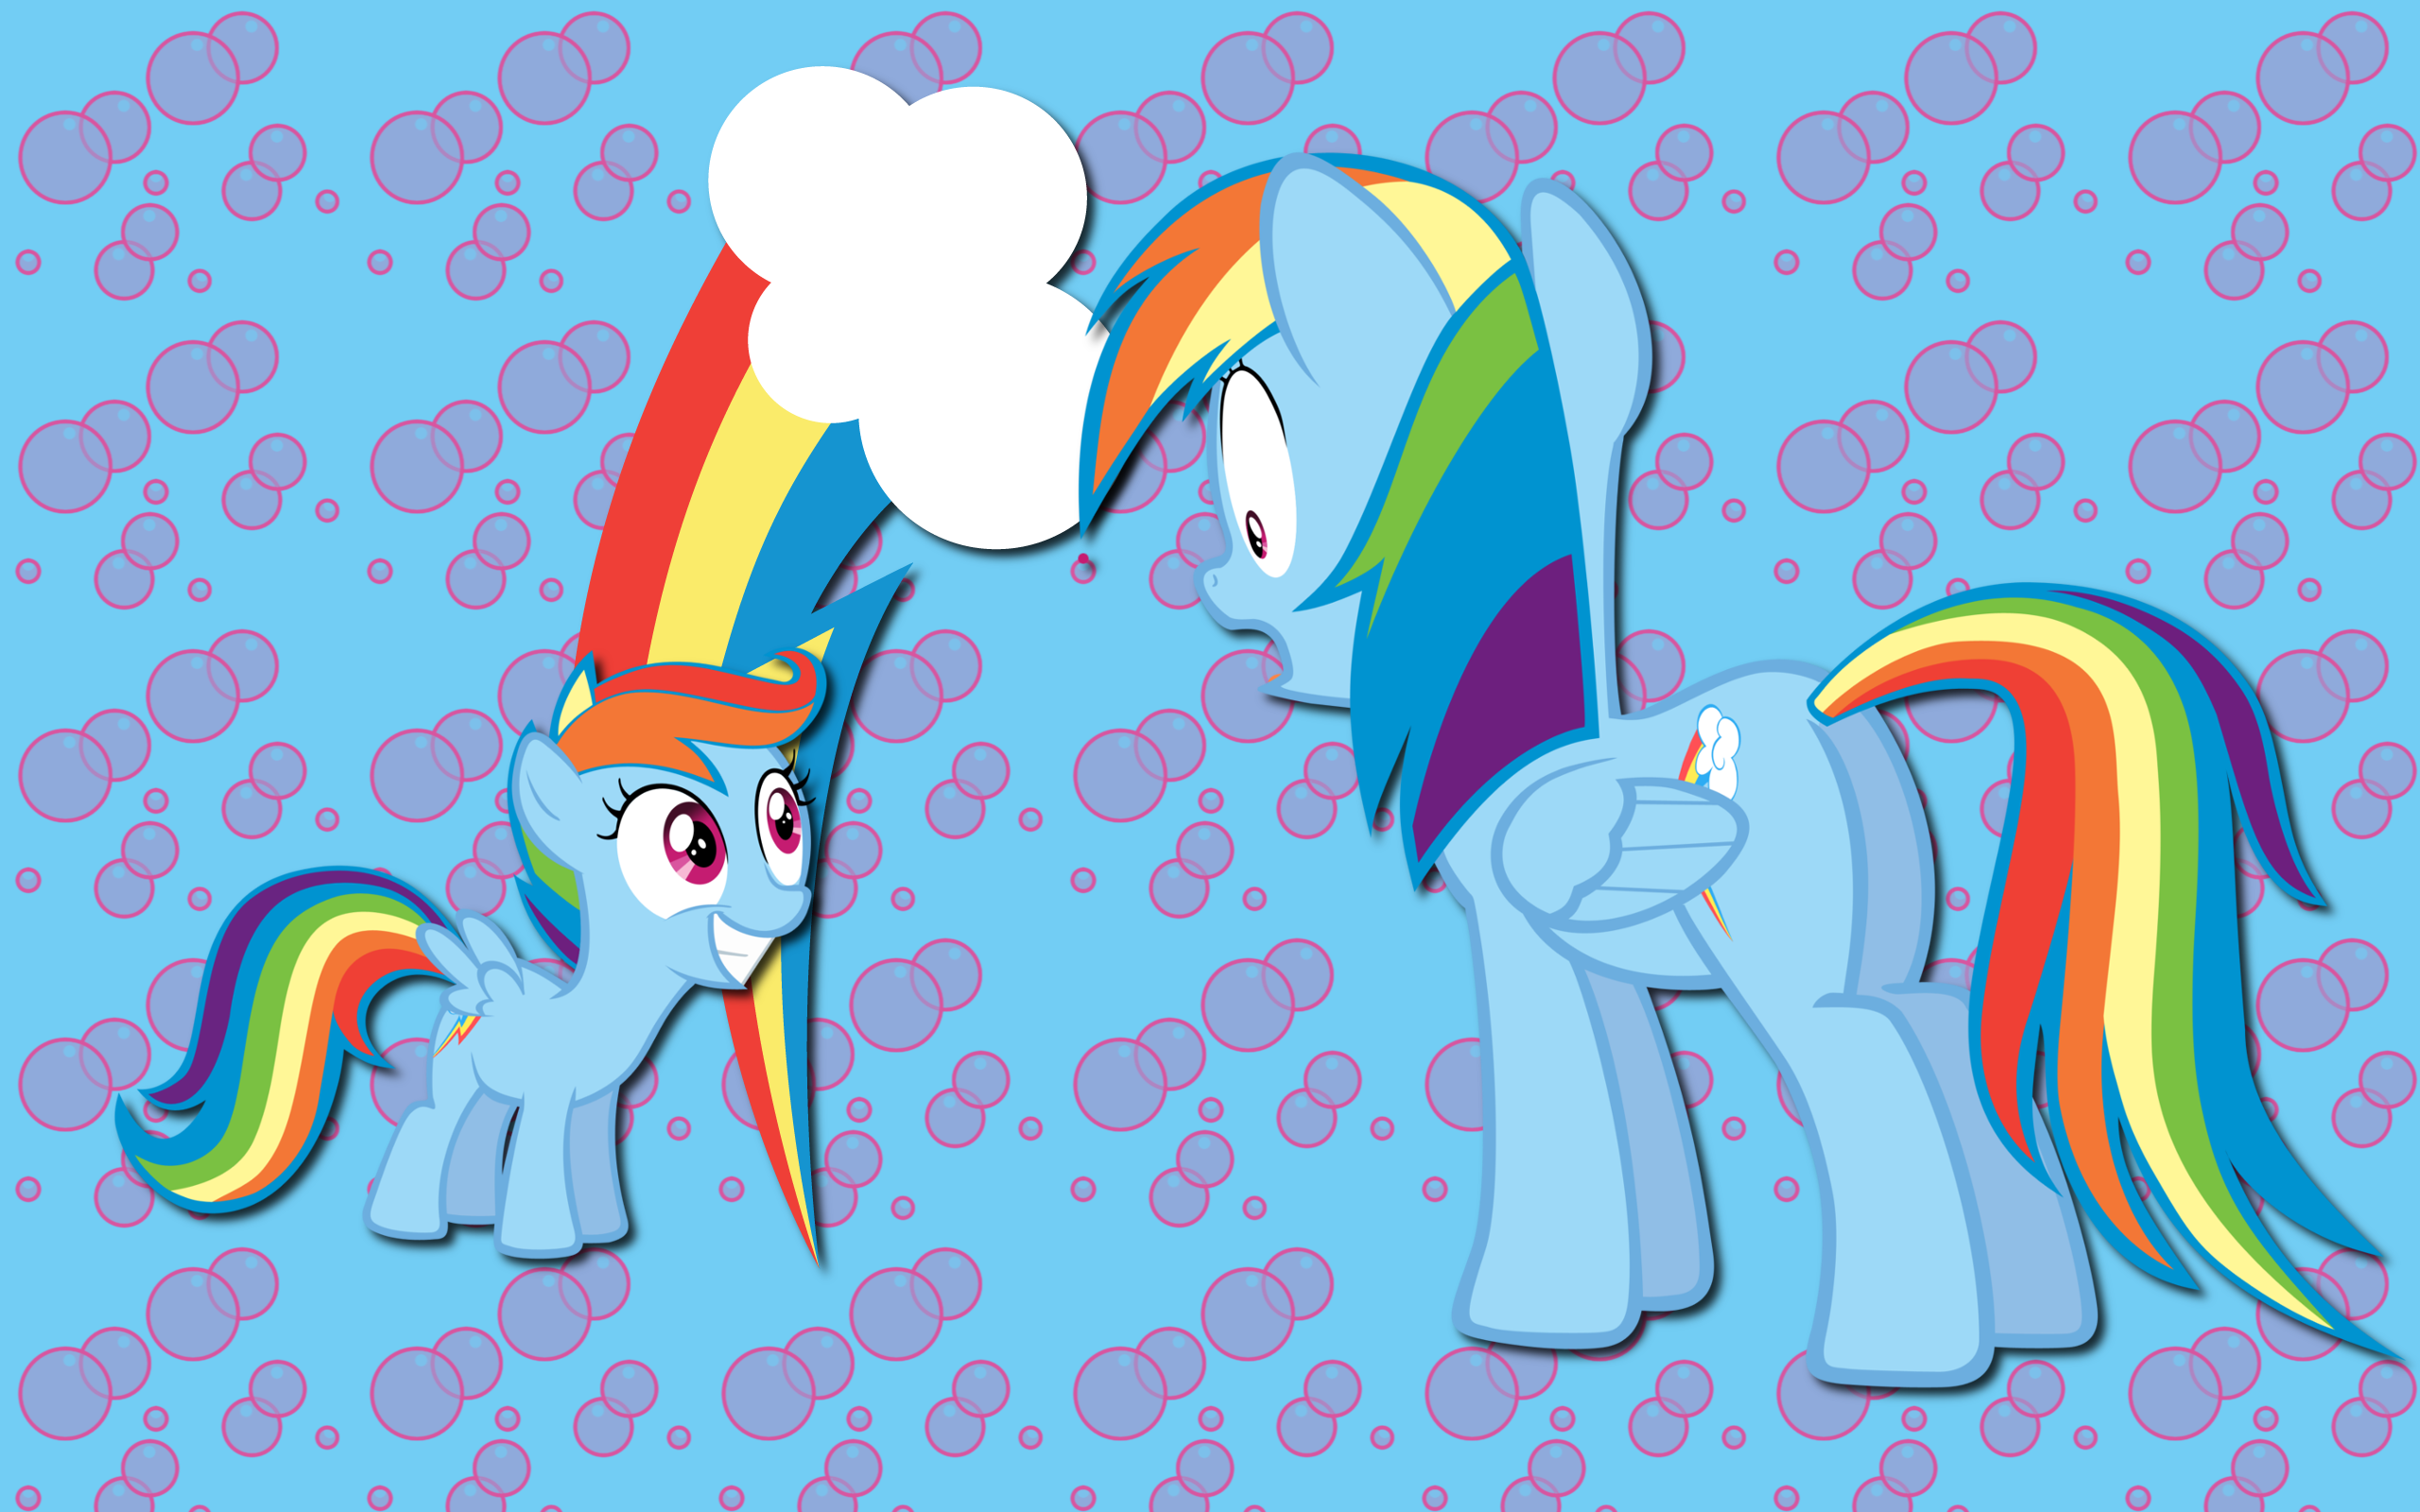 Scoots and Dashie WP by AliceHumanSacrifice0, ooklah and orangel8989